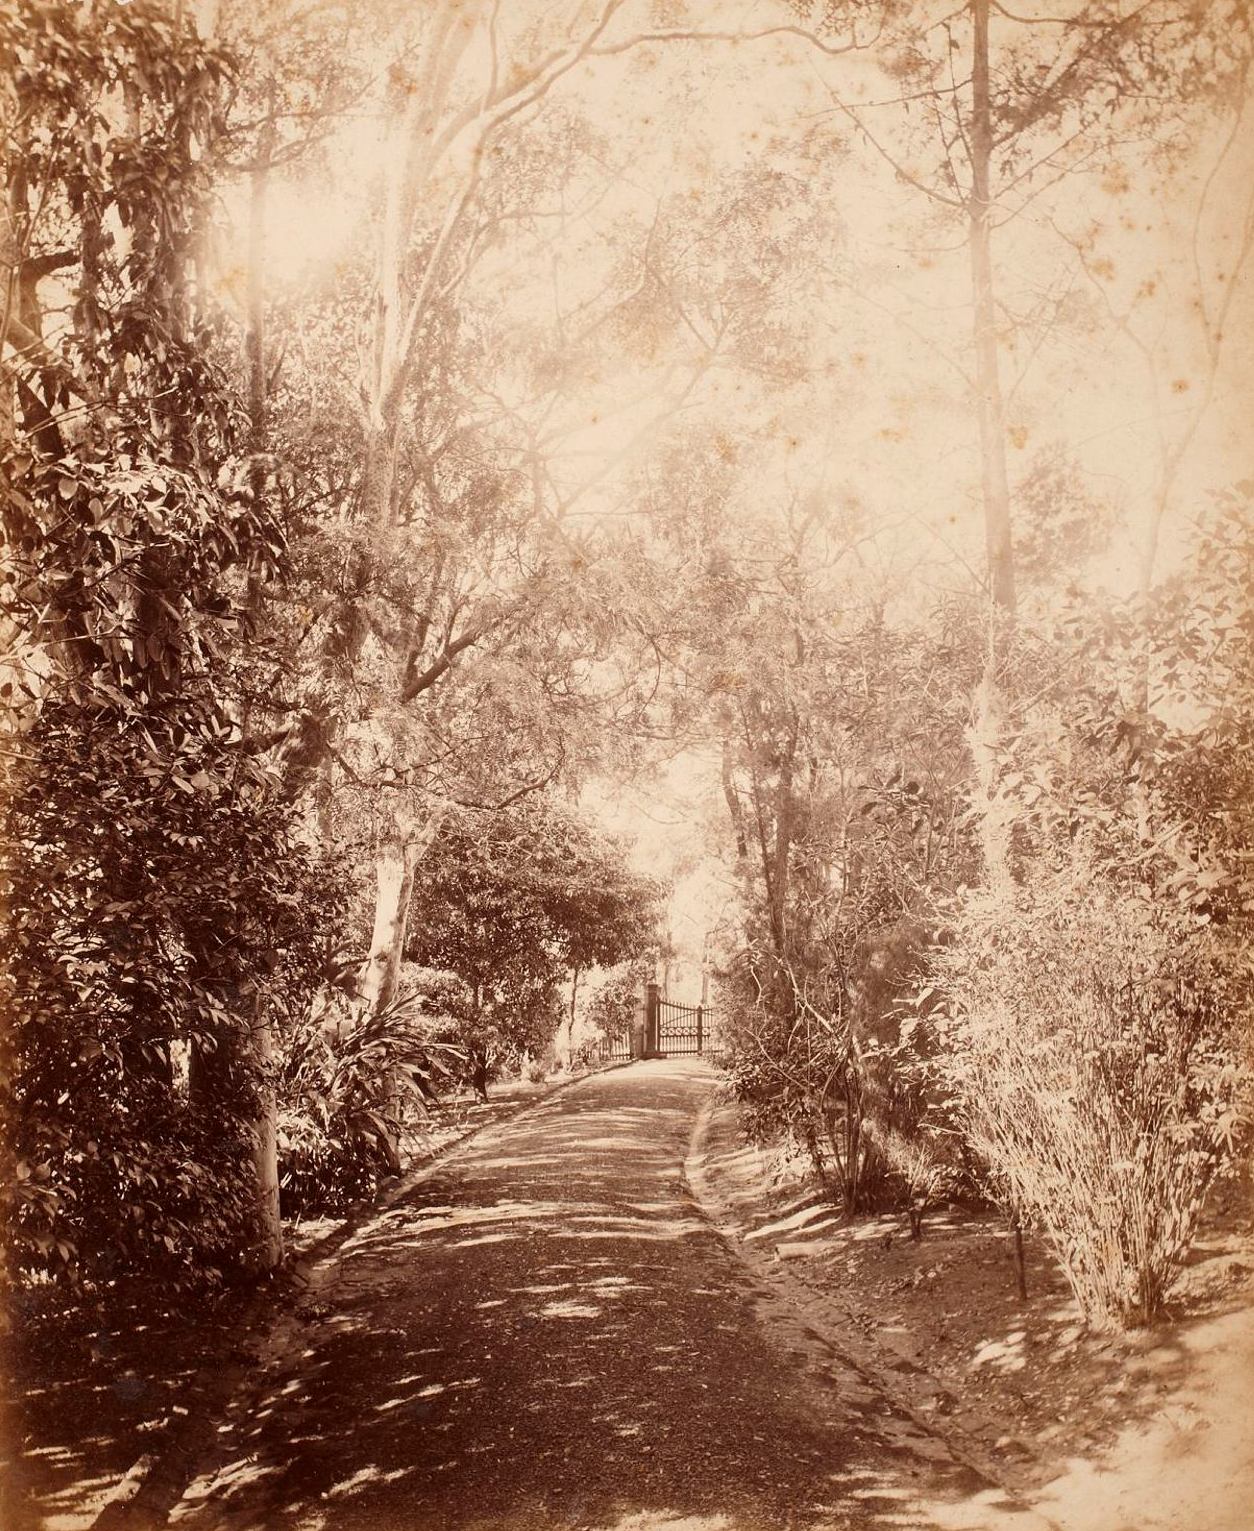 View in carriage drive, Clifton, Kirribilli Point, around 1888 / photographer unknown